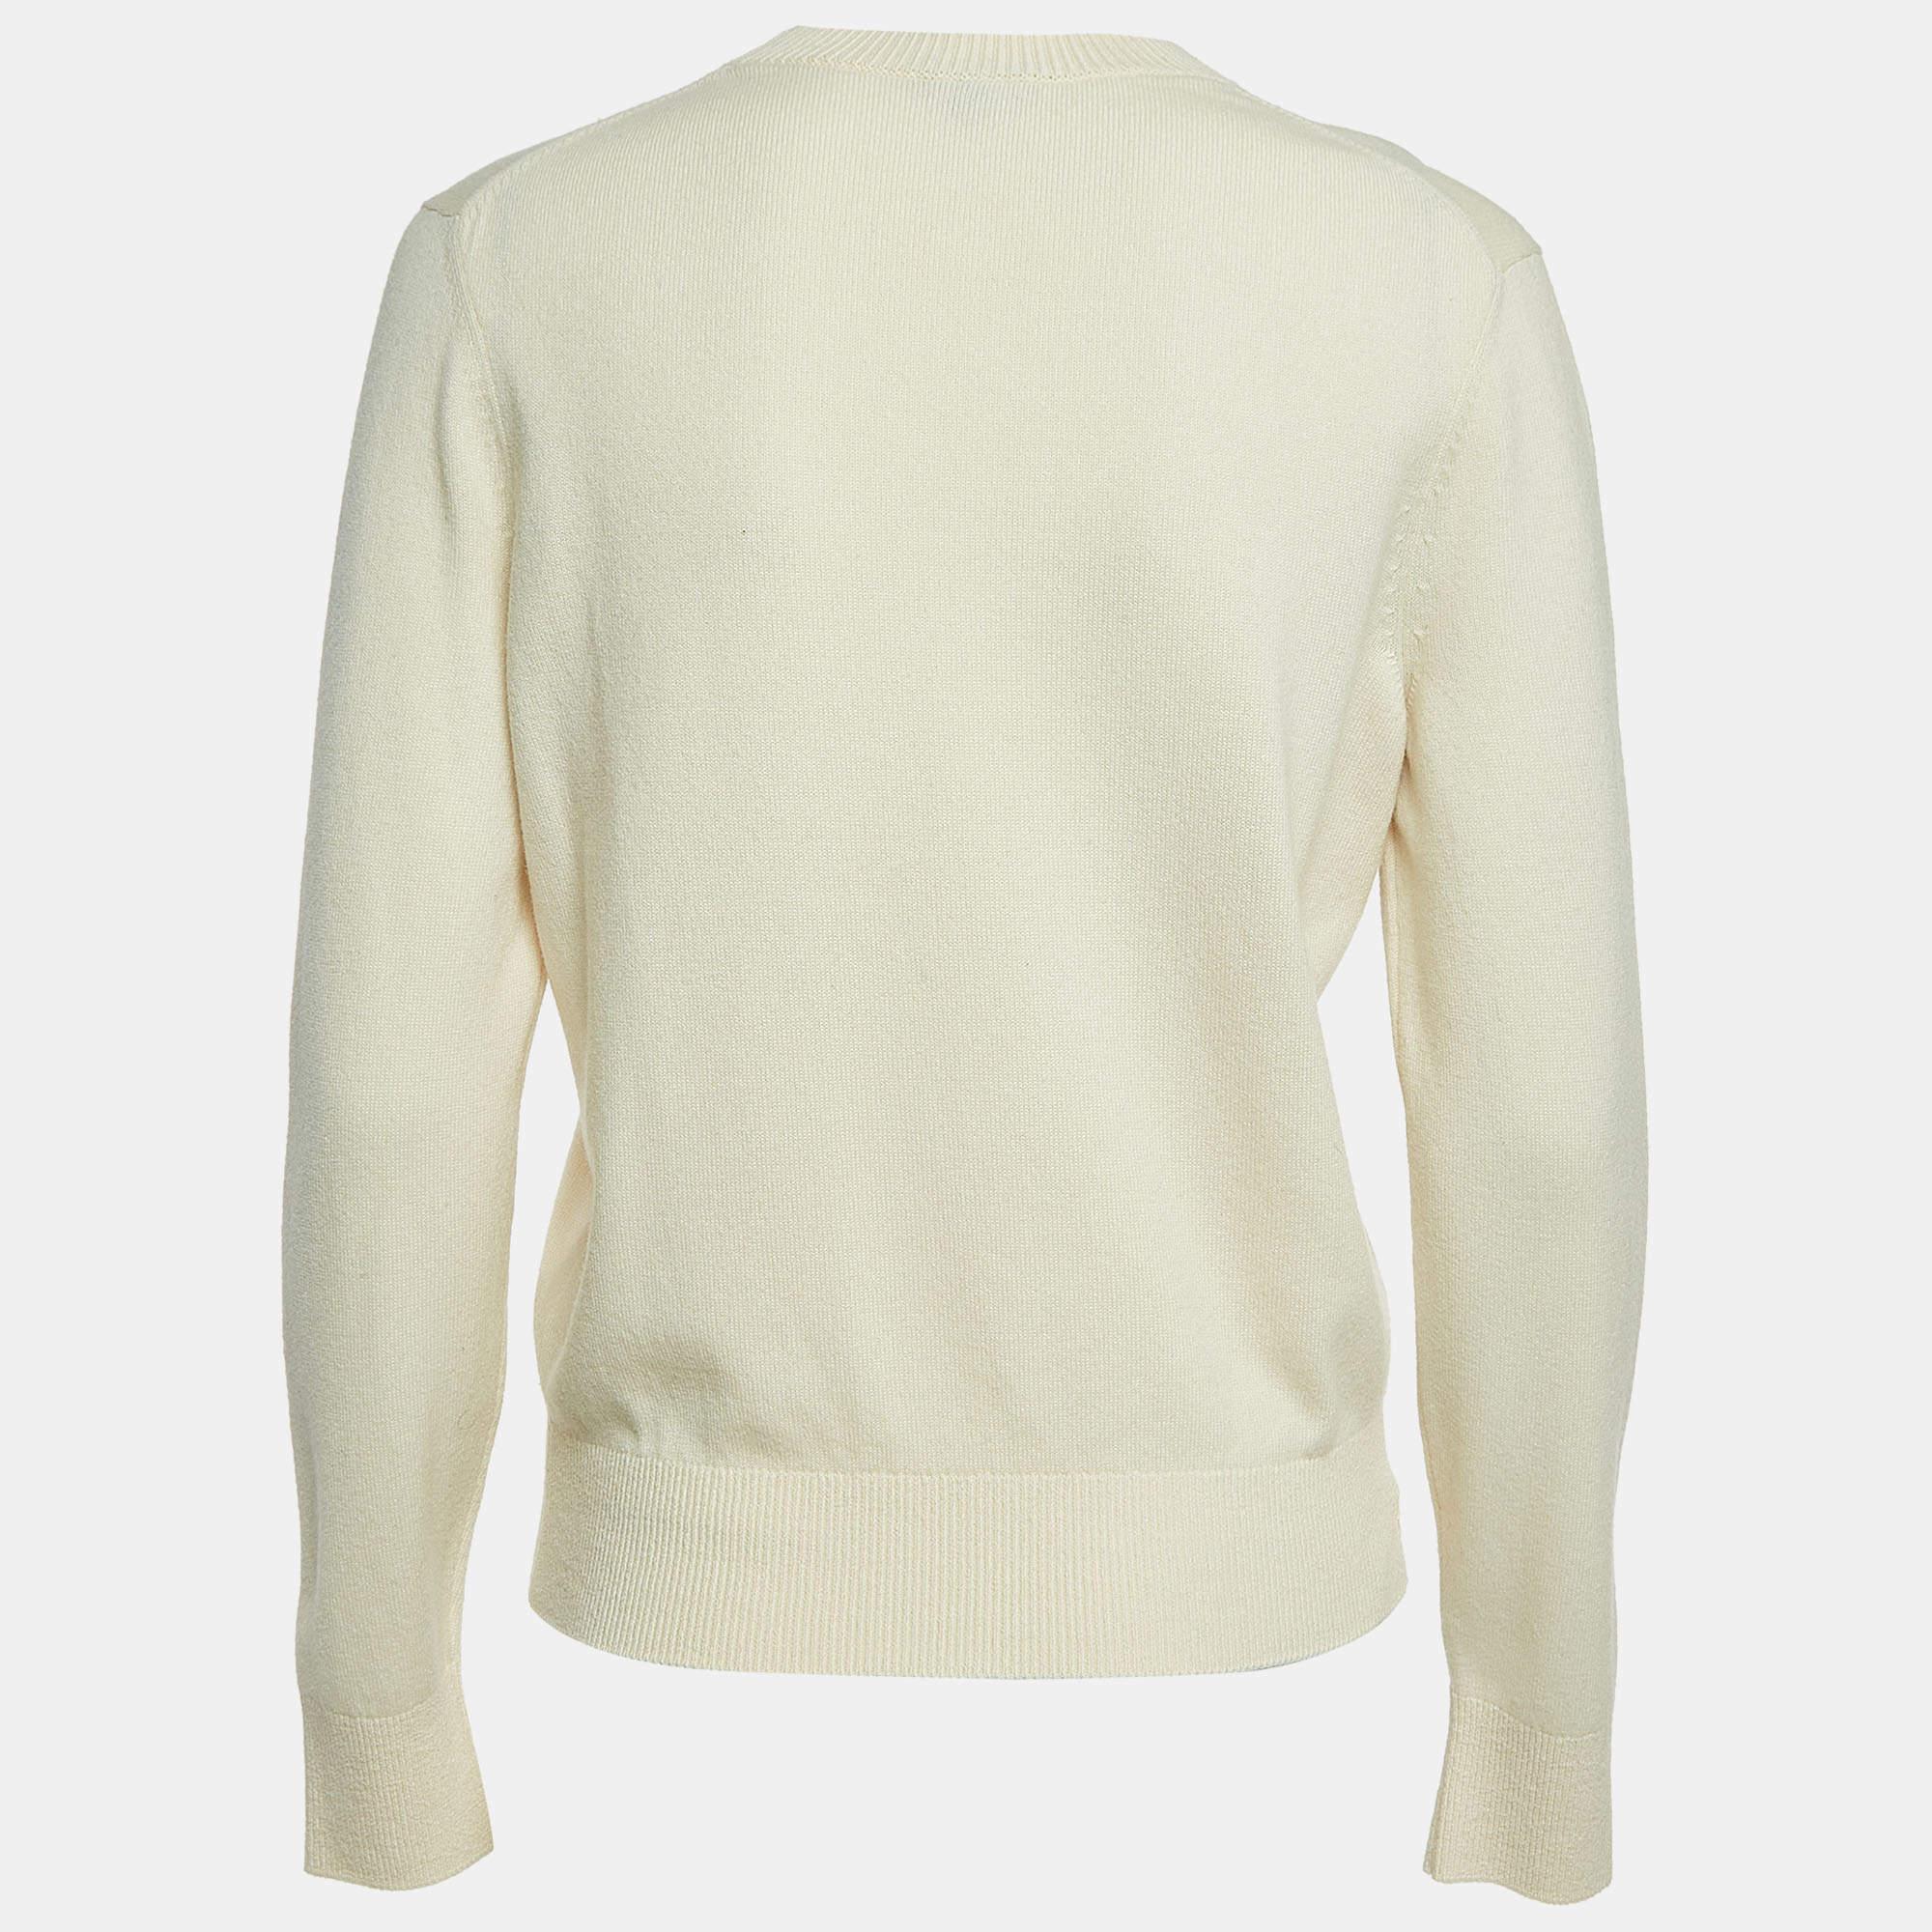 Wrap yourself in warmth and style with this Chanel cream sweater. Meticulously crafted for comfort and fashion, it epitomizes timeless sophistication. Each stitch reflects quality, making it an essential piece for every wardrobe.

